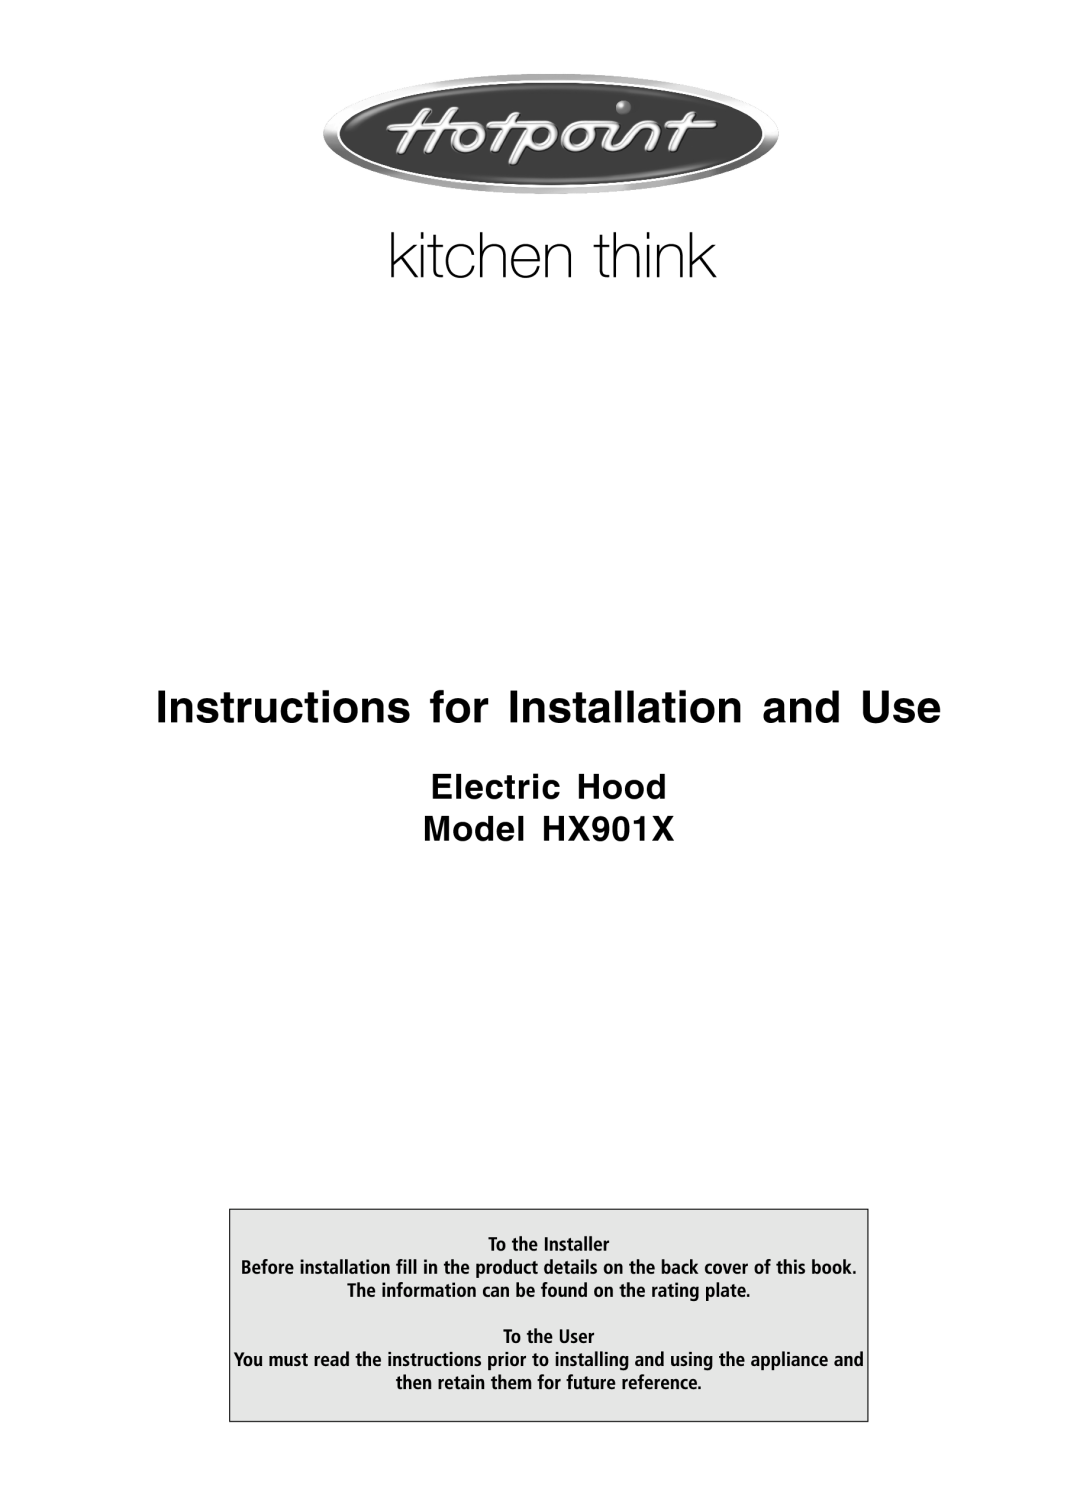 Hotpoint manual Electric Hood Model HX901X, Instructions for Installation and Use 